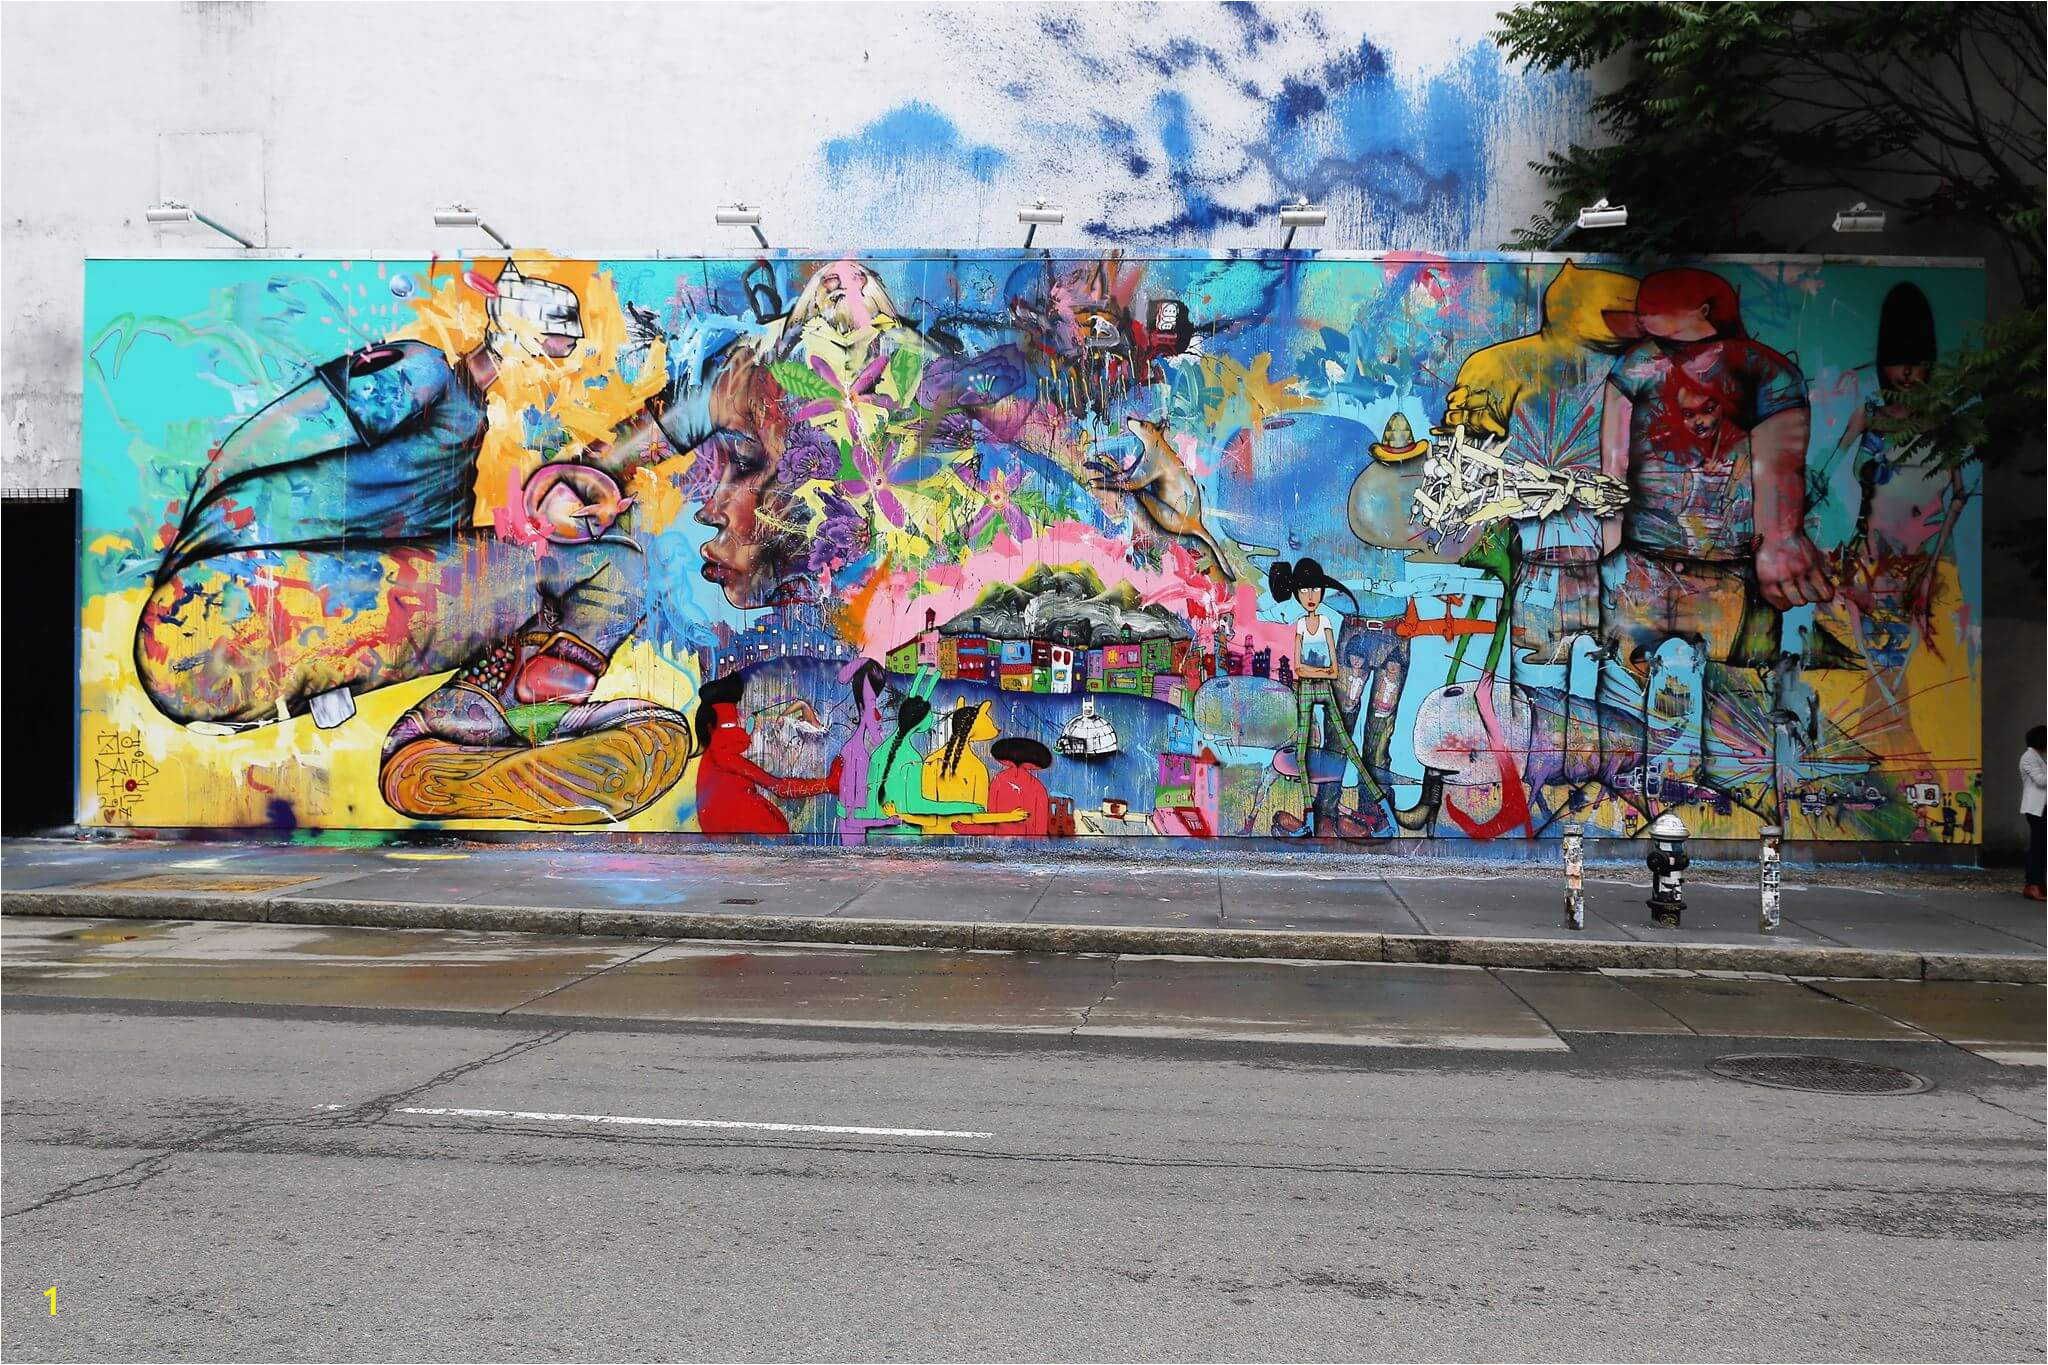 Bowery Mural Wall 2019 New Mural by David Choe On the Iconic Houston Bowery